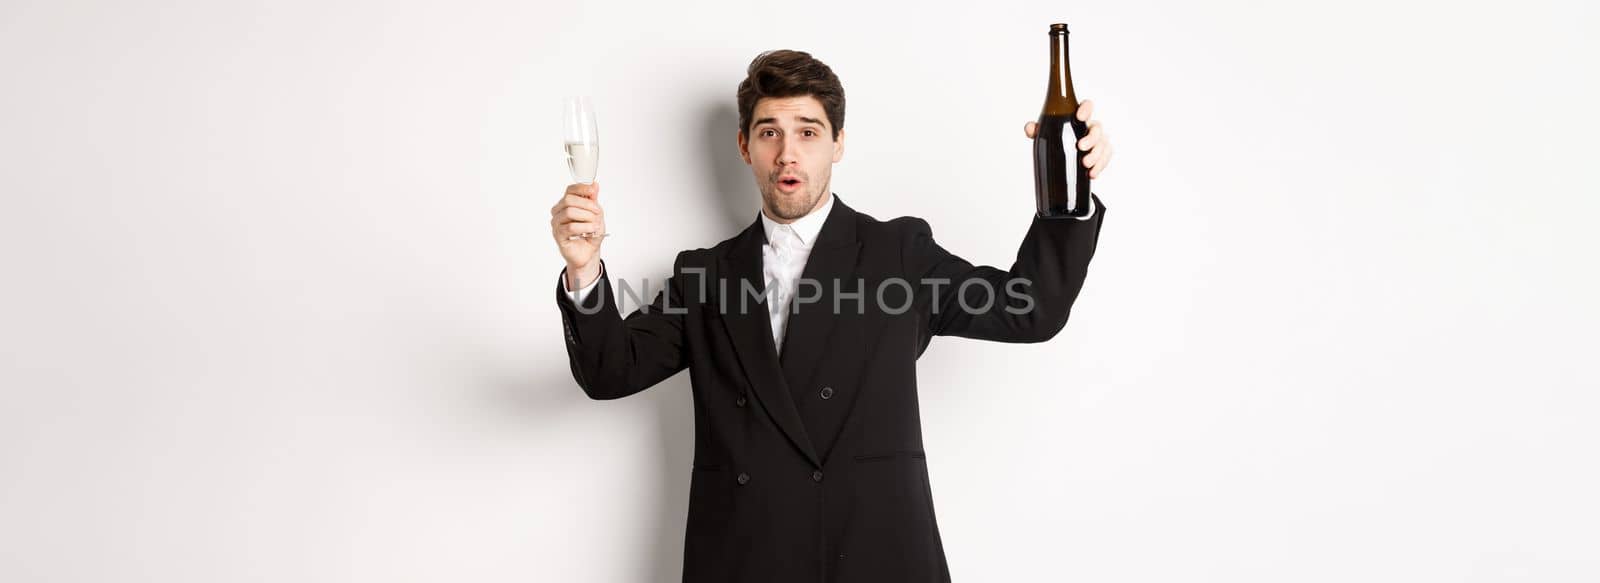 Concept of holidays, party and celebration. Image of handsome man in stylish suit, dancing with bottle of champagne, drinking on new year, standing over white background.